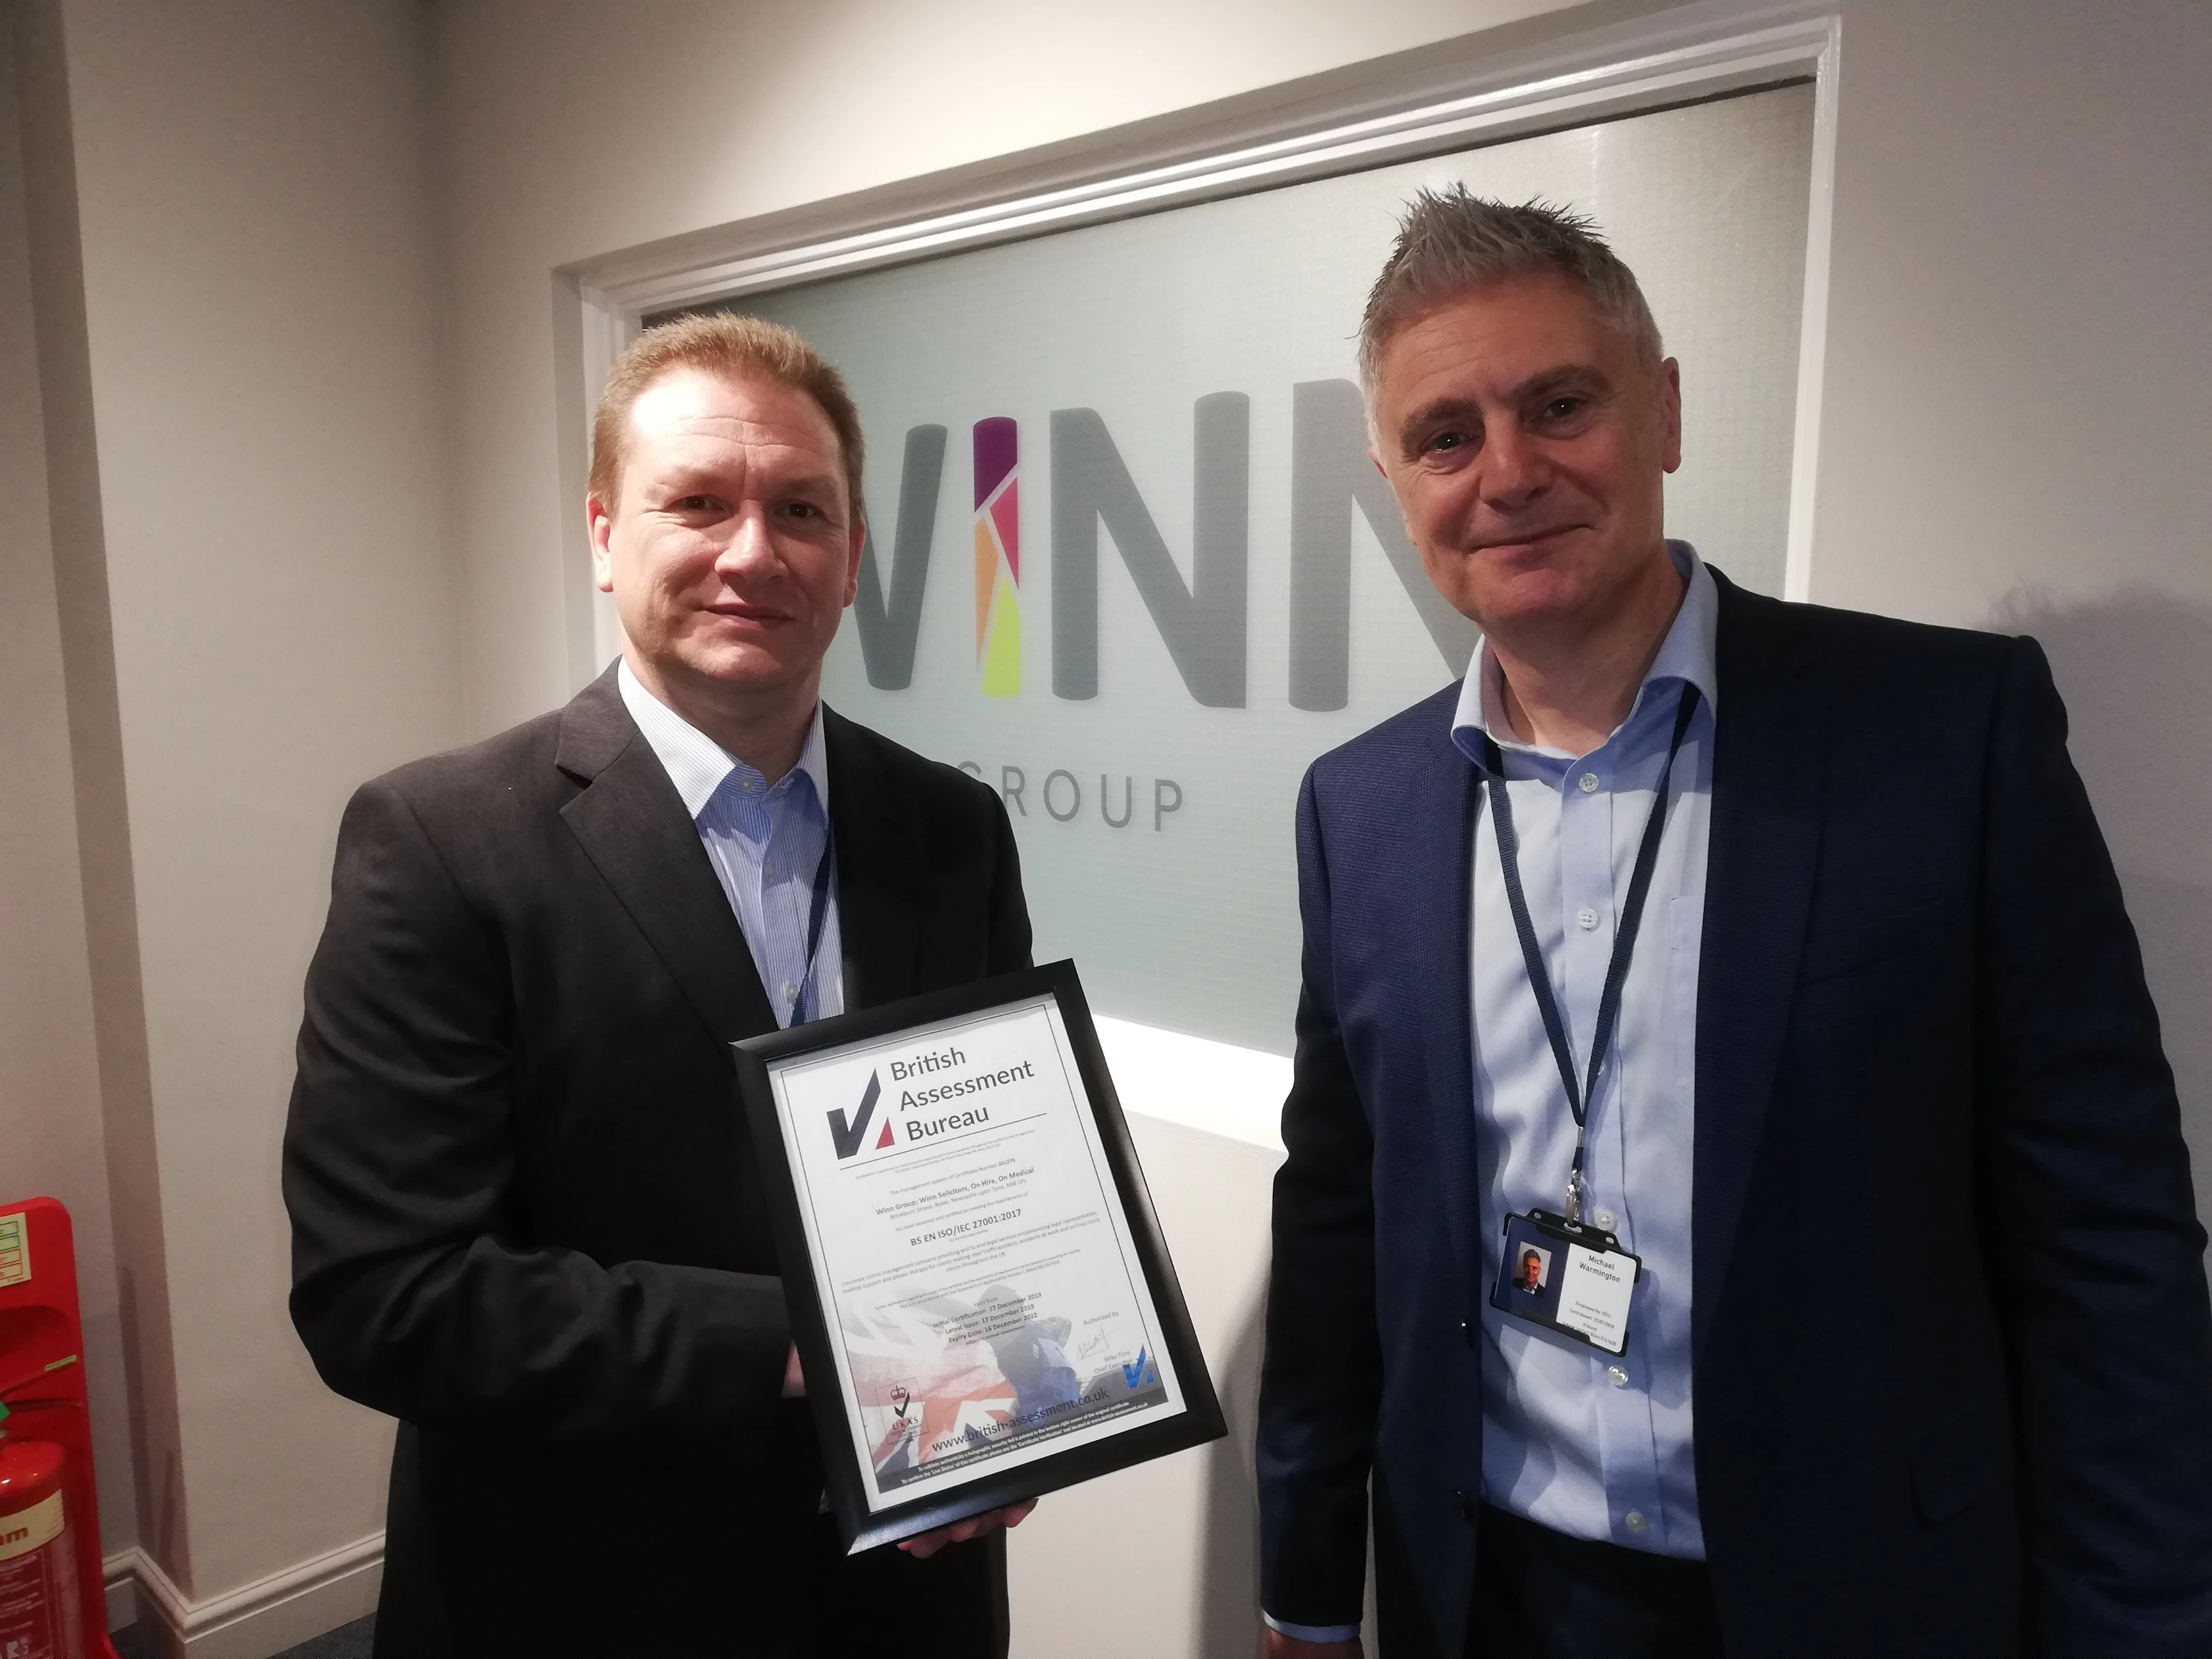 David Office, Information Security Officer, and Michael Warmington, Associate Director, with the ISO accreditation